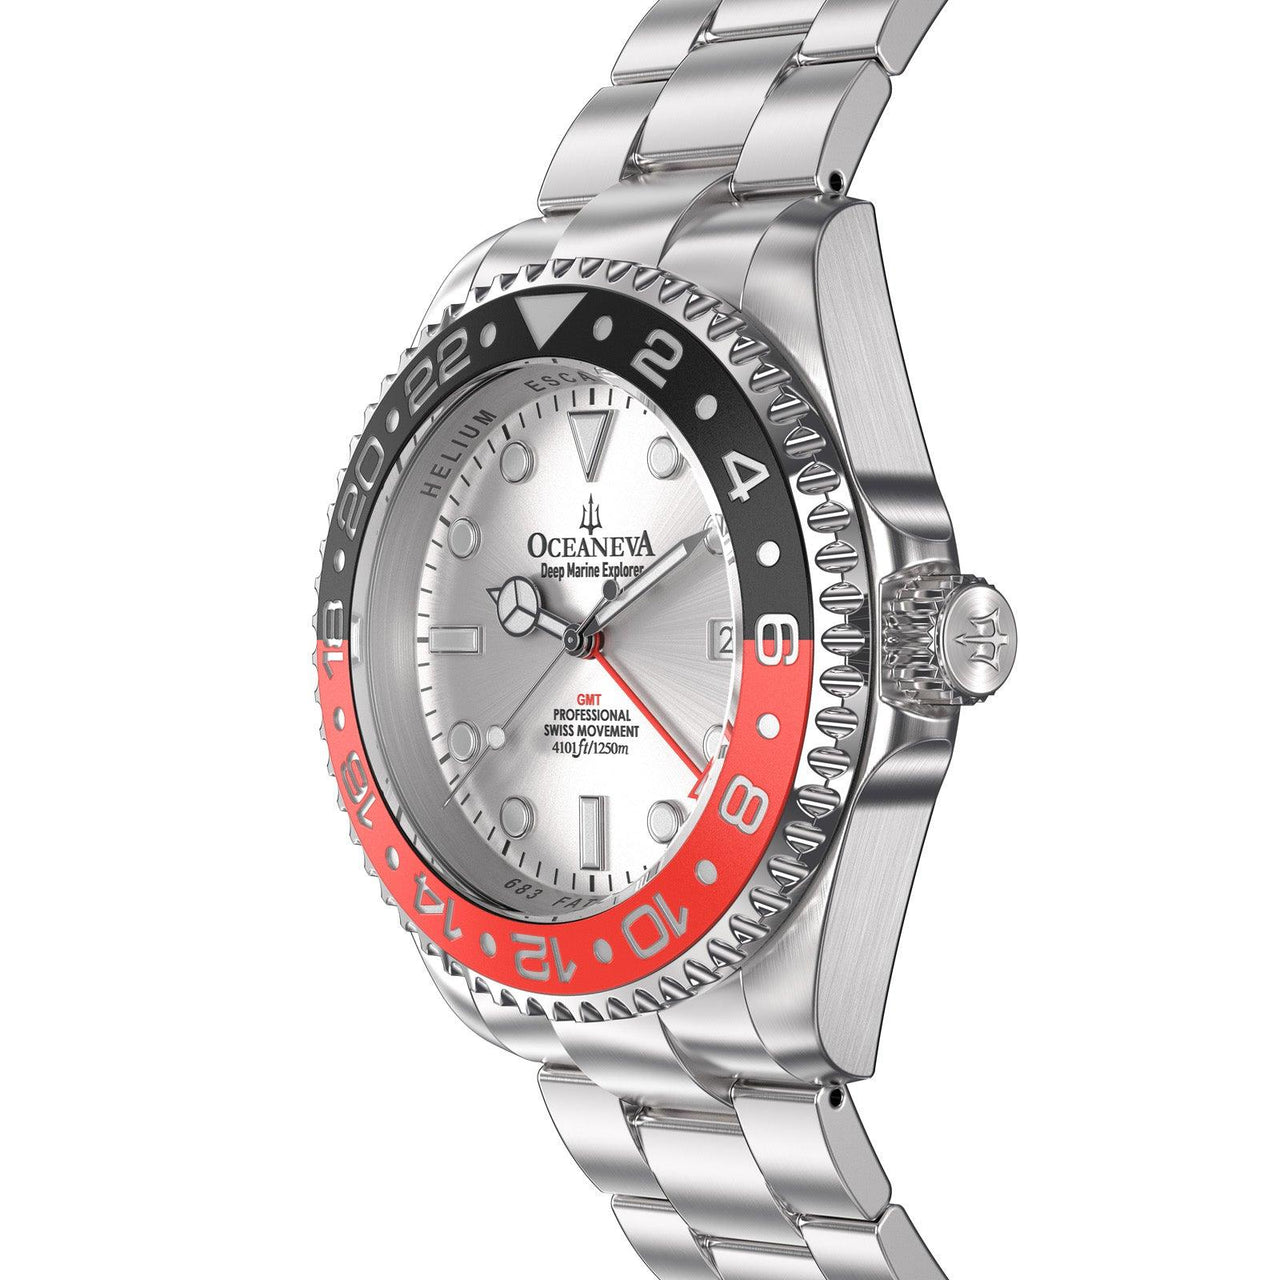 Oceaneva 1250M GMT Dive Watch Silver Red And Black Side View Crown